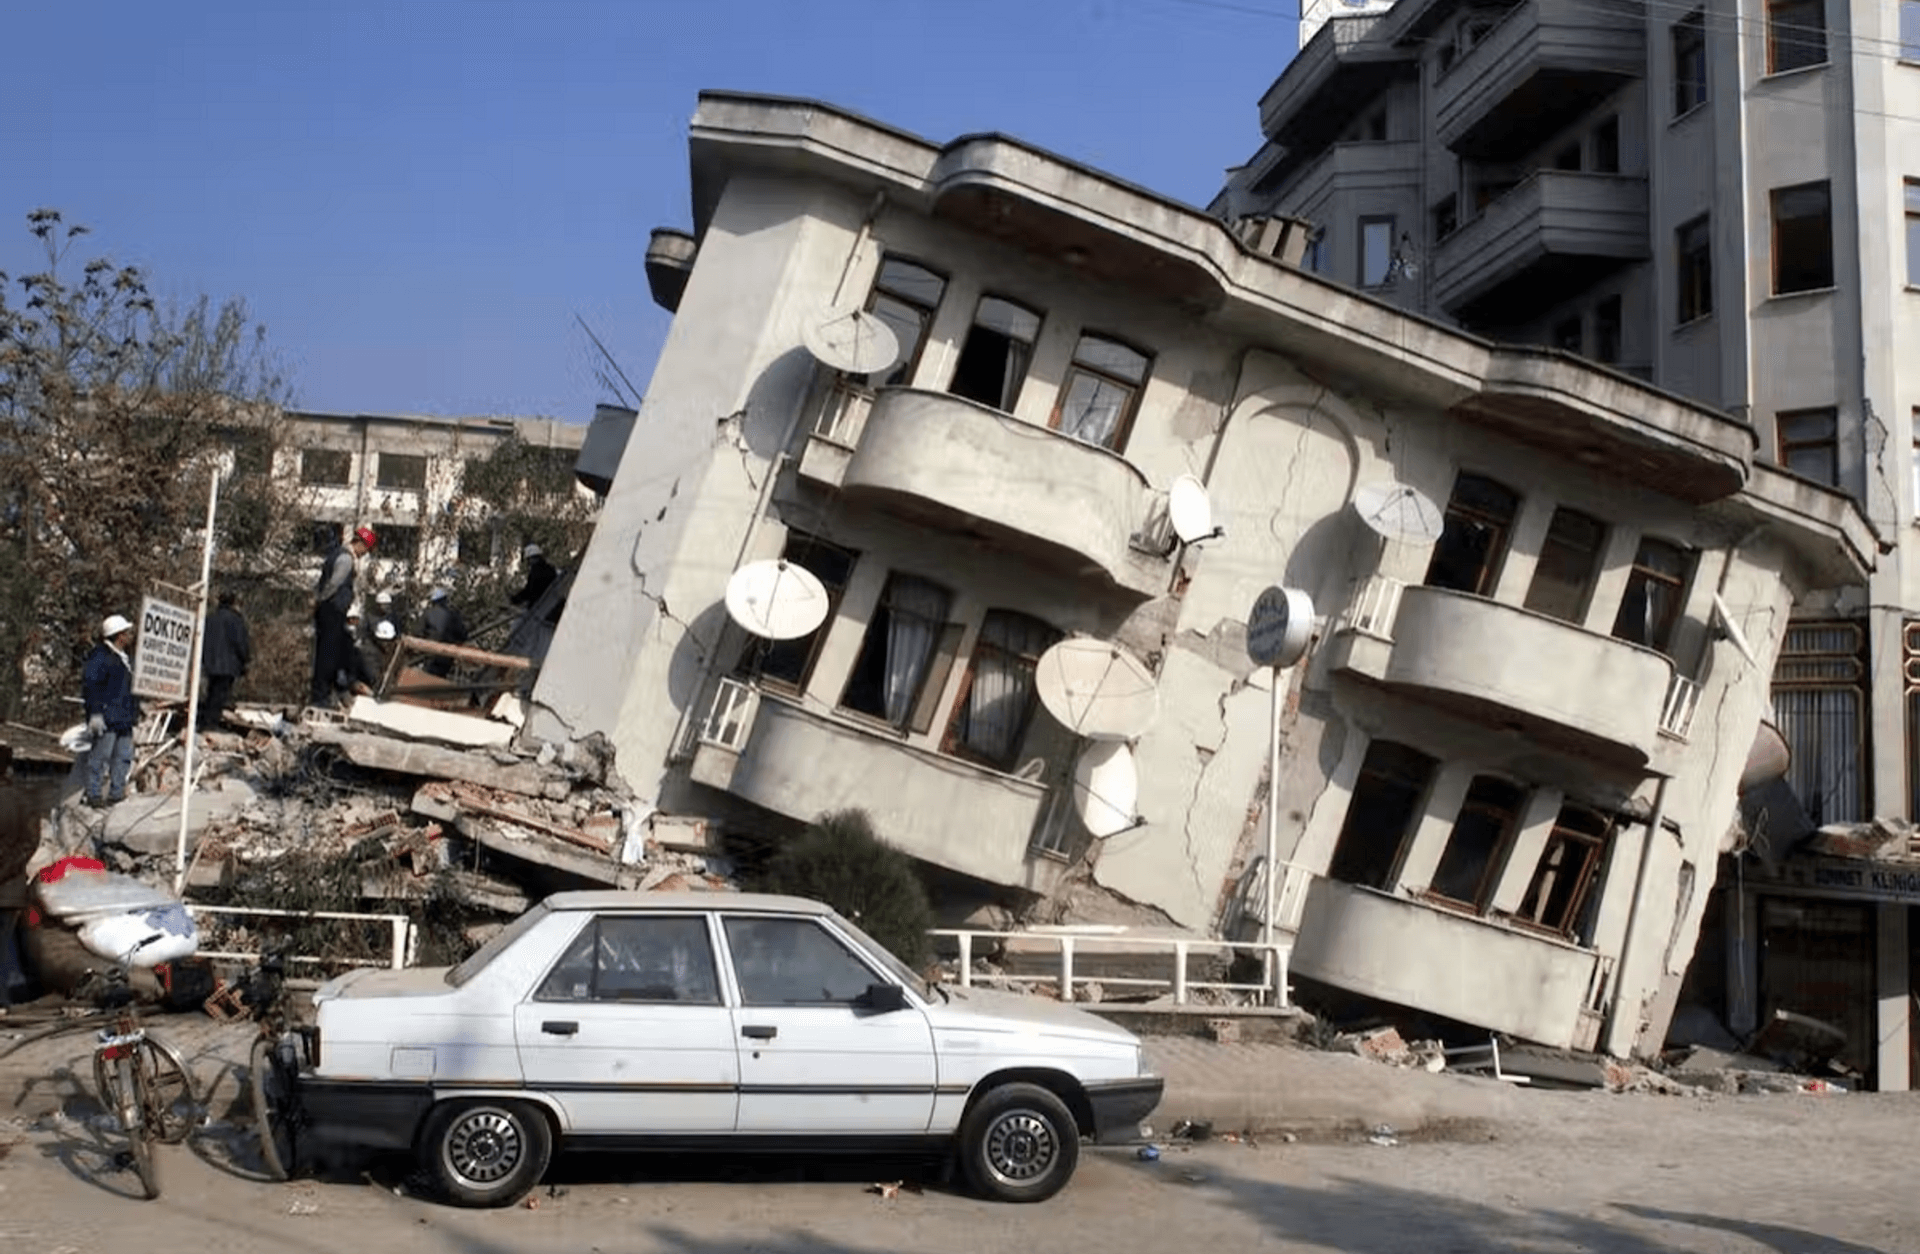 Earthquake in Turkey exposes gap between seismic knowledge and action - but it is possible to prepare